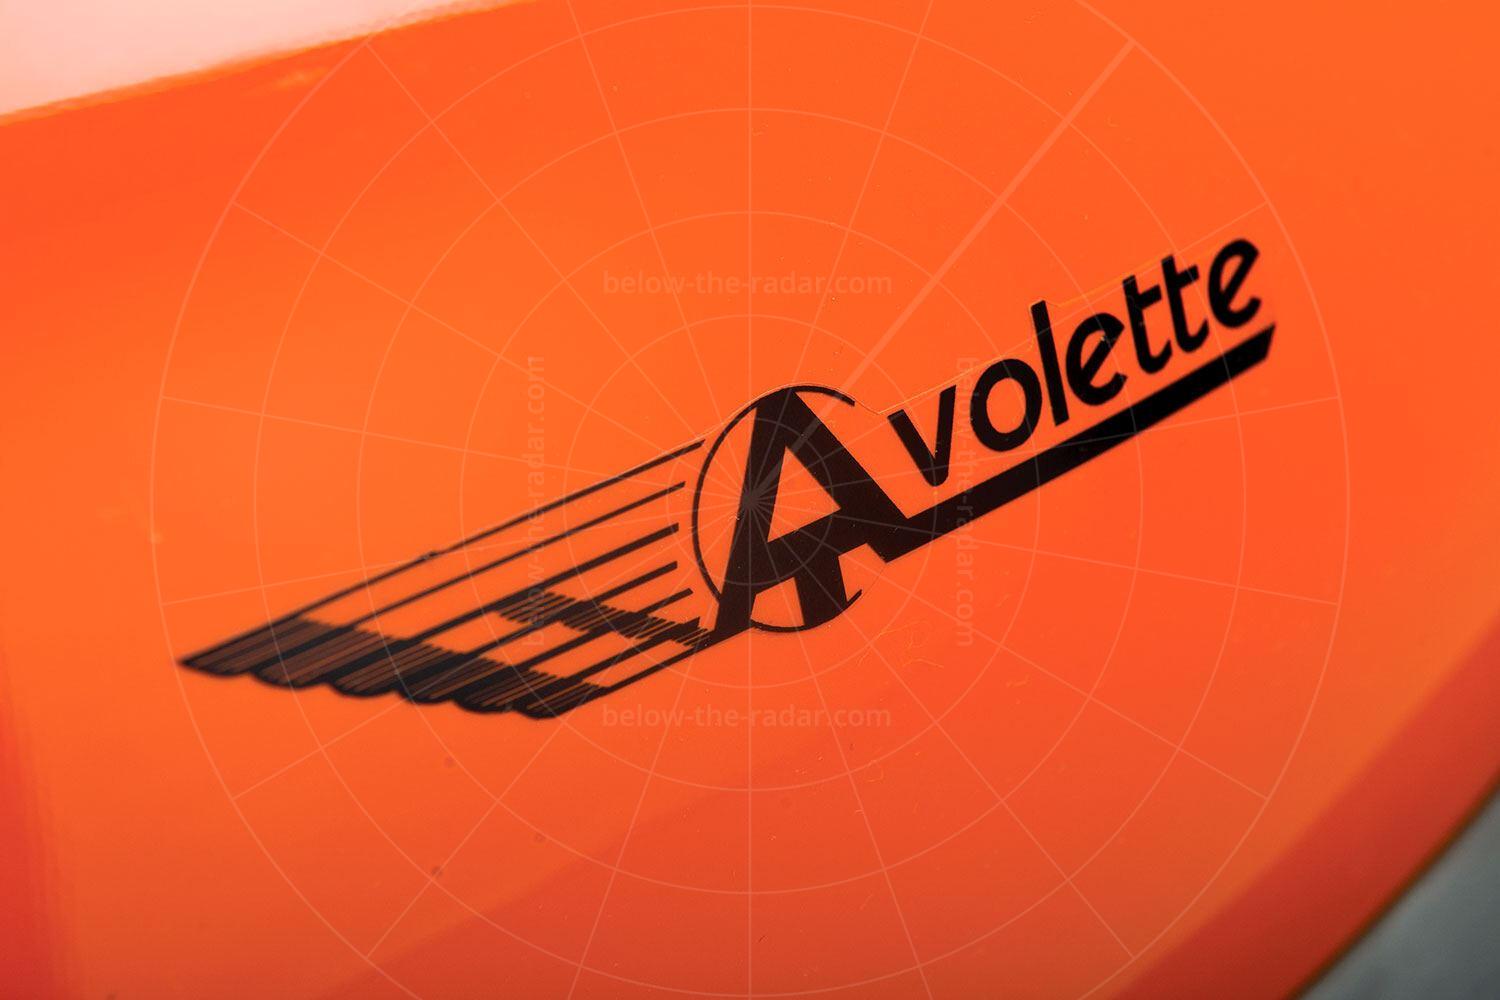 Avolette Record Deluxe decal Pic: RM Sotheby's | Avolette Record Deluxe decal